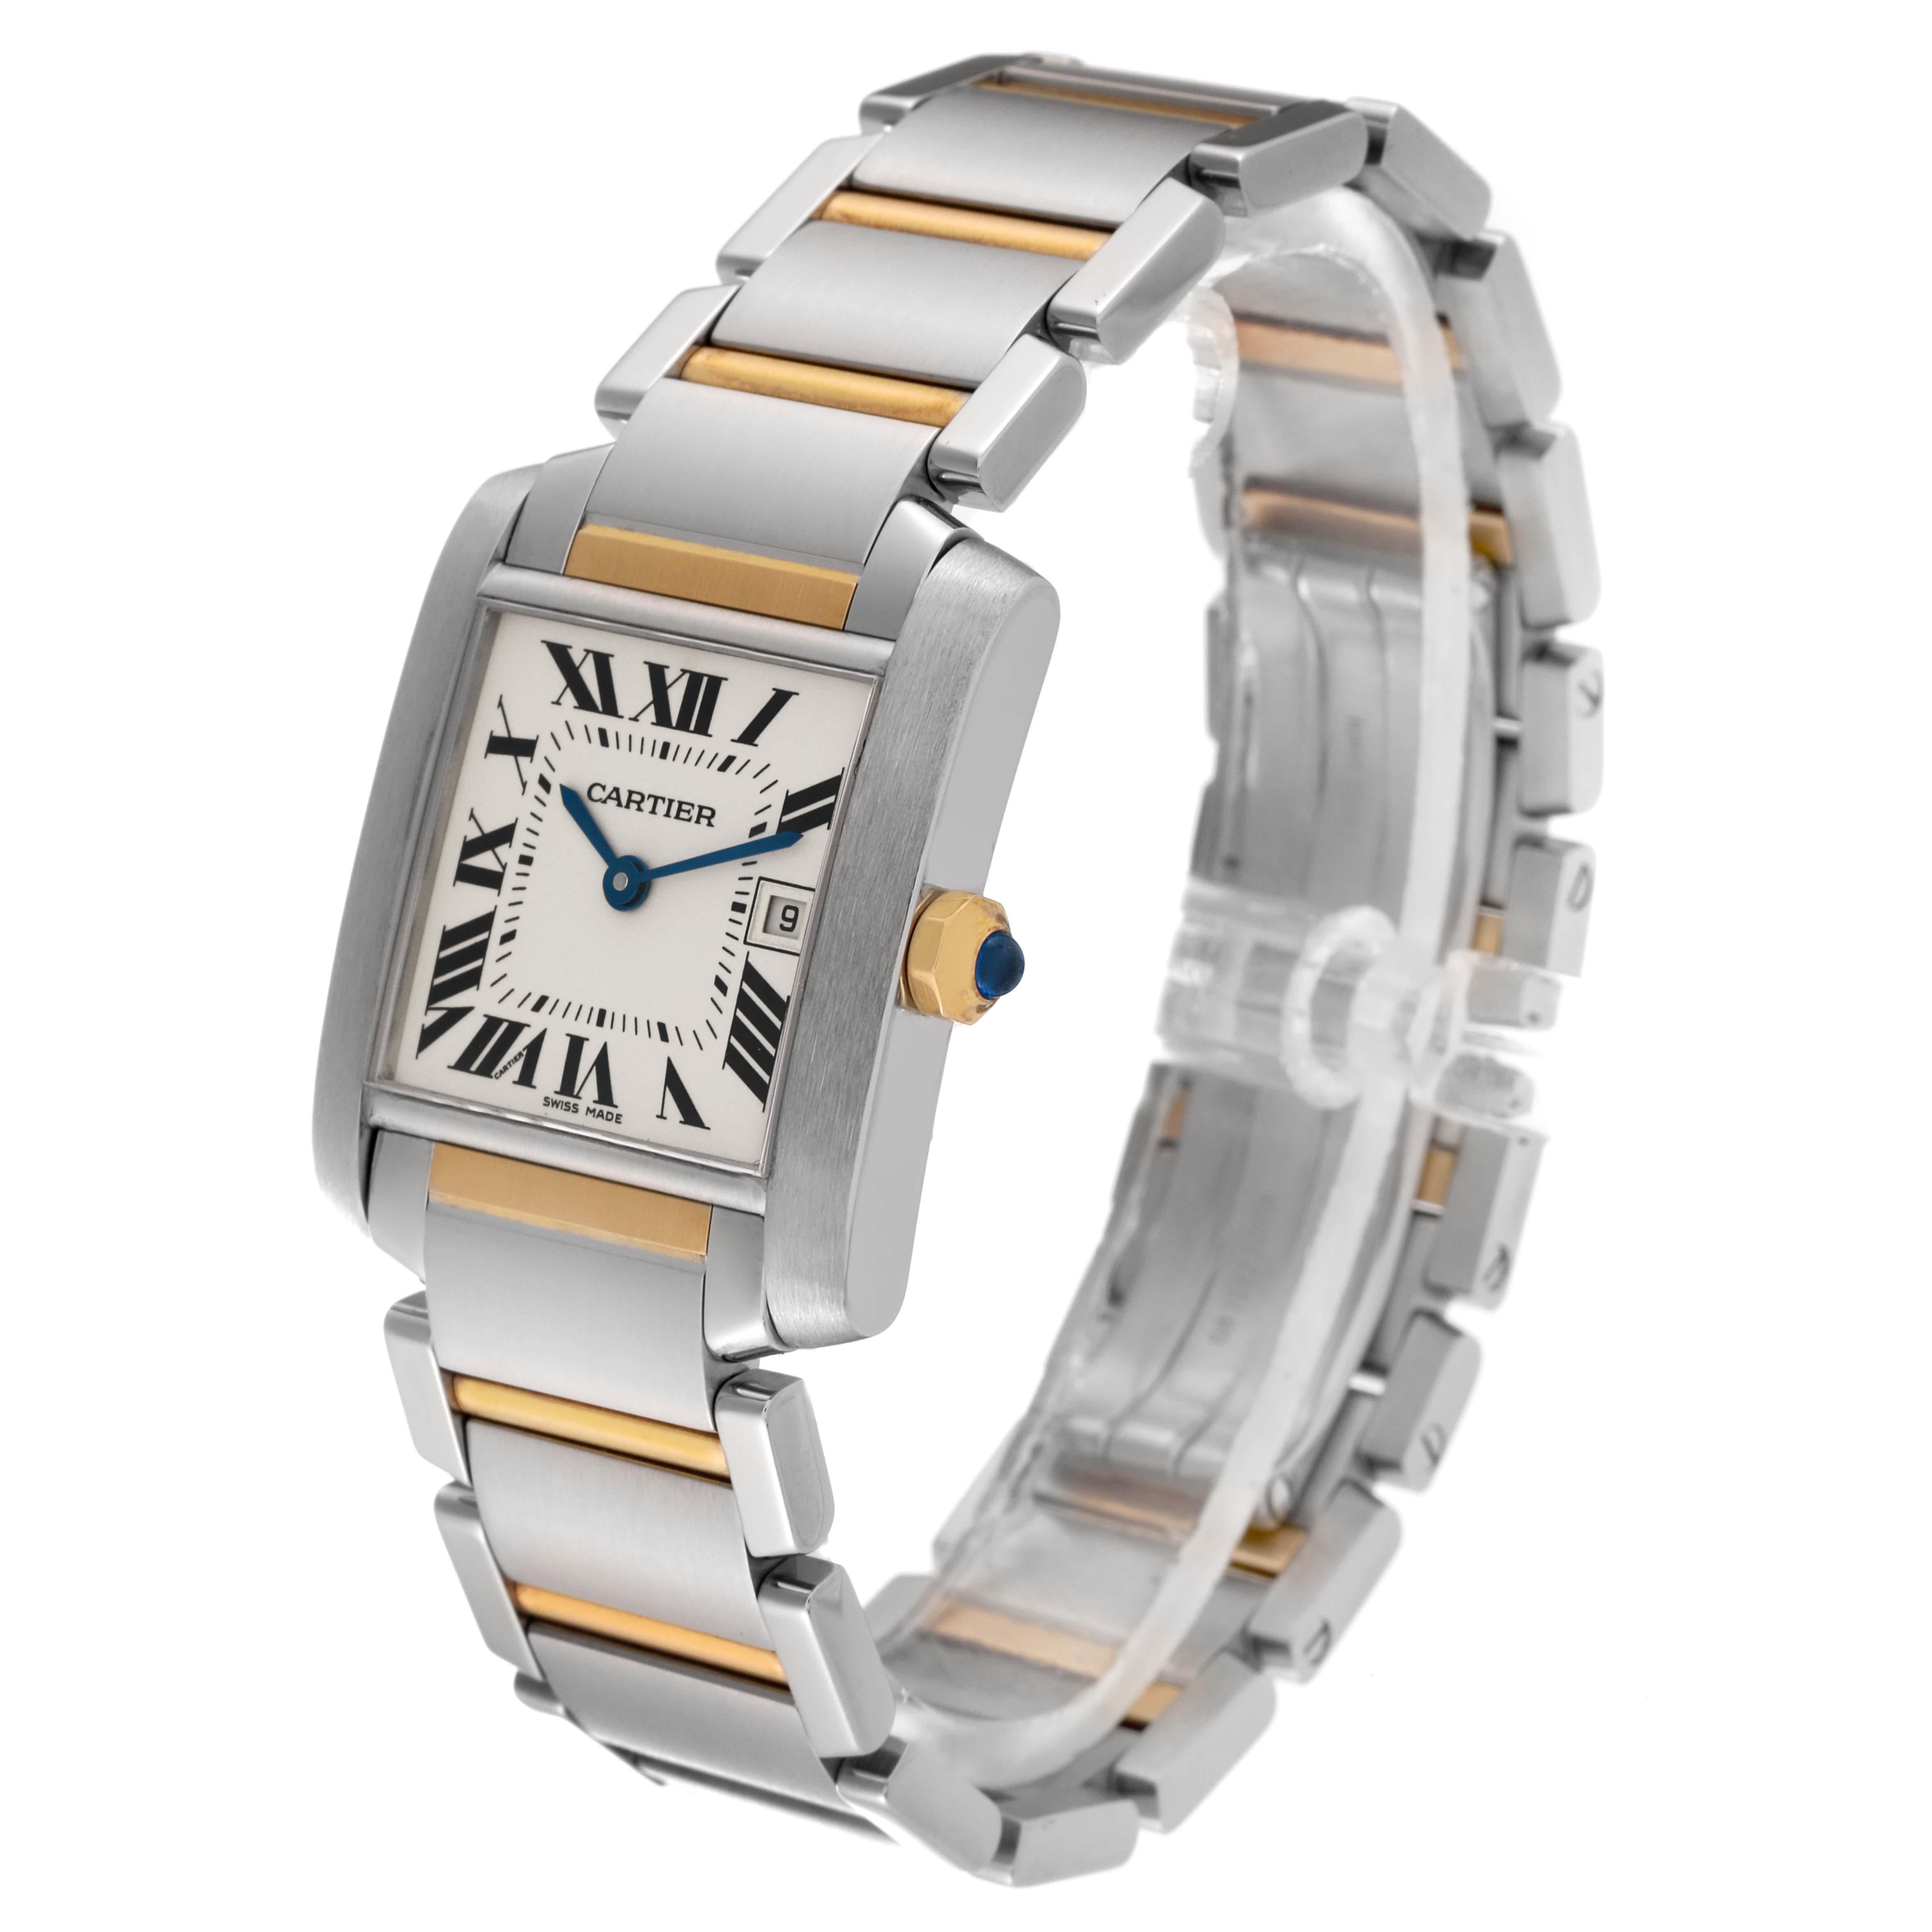 Cartier Tank Francaise Midsize Steel Yellow Gold Ladies Watch W51012Q4 2